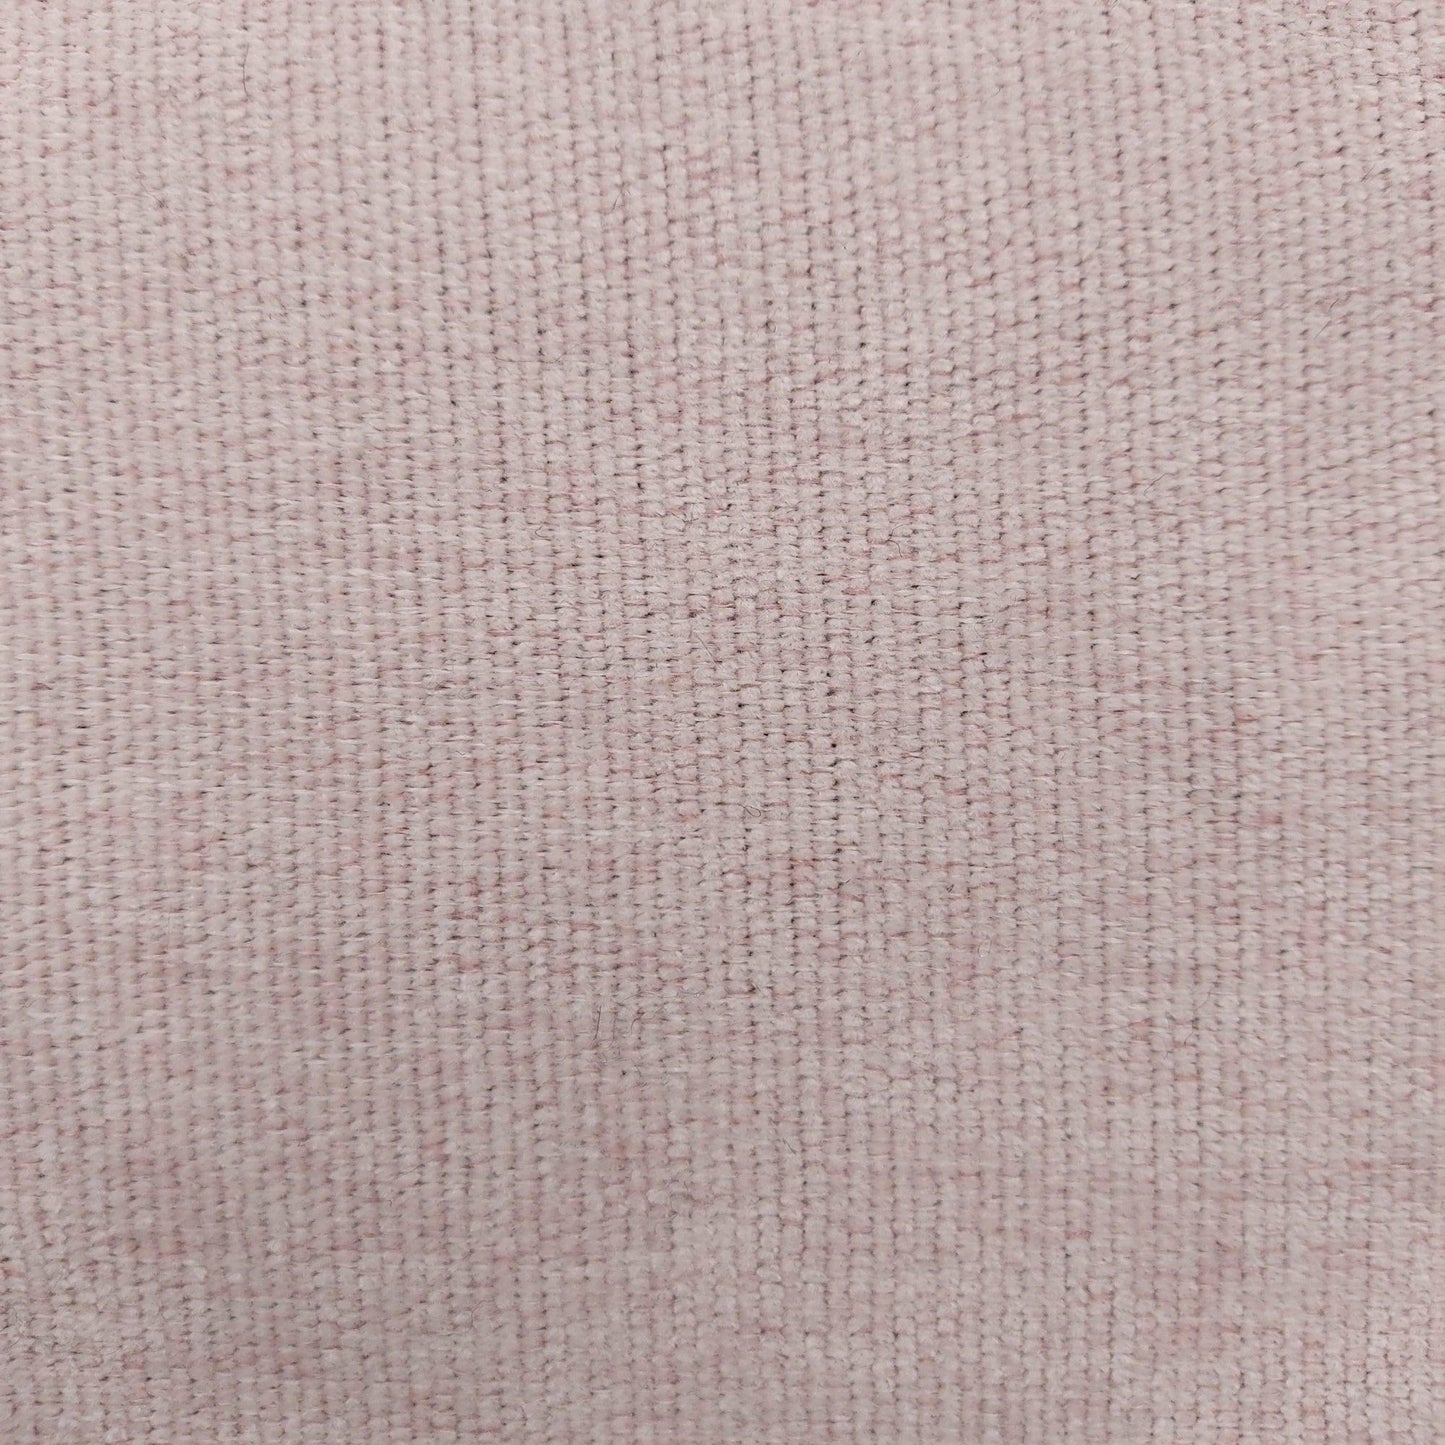 Chenille Upholstery Fabric Snug Pink